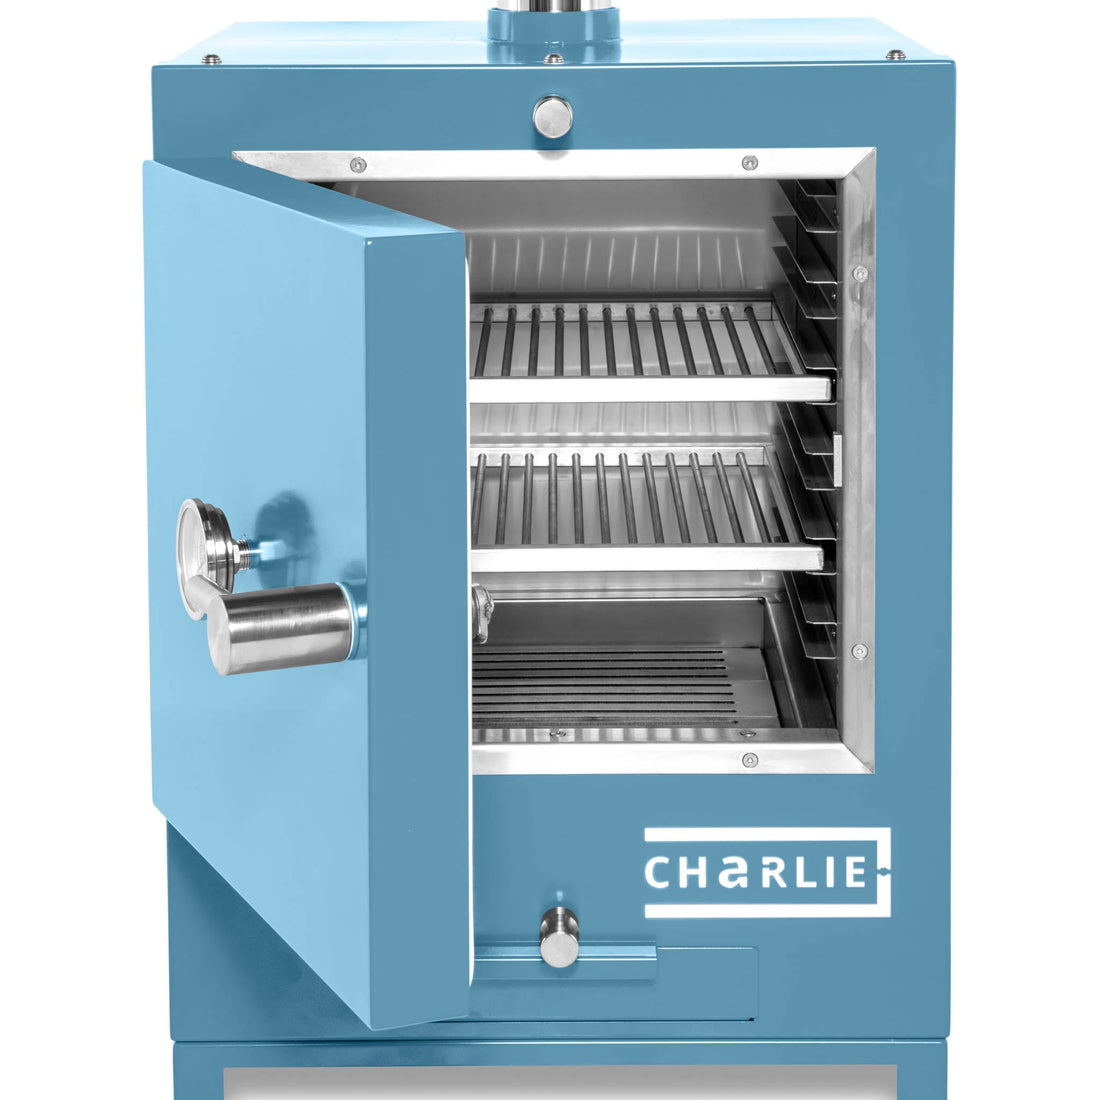 Cheeky Charlie Charcoal Tabletop Oven - Blue Marlin - Charlie Oven